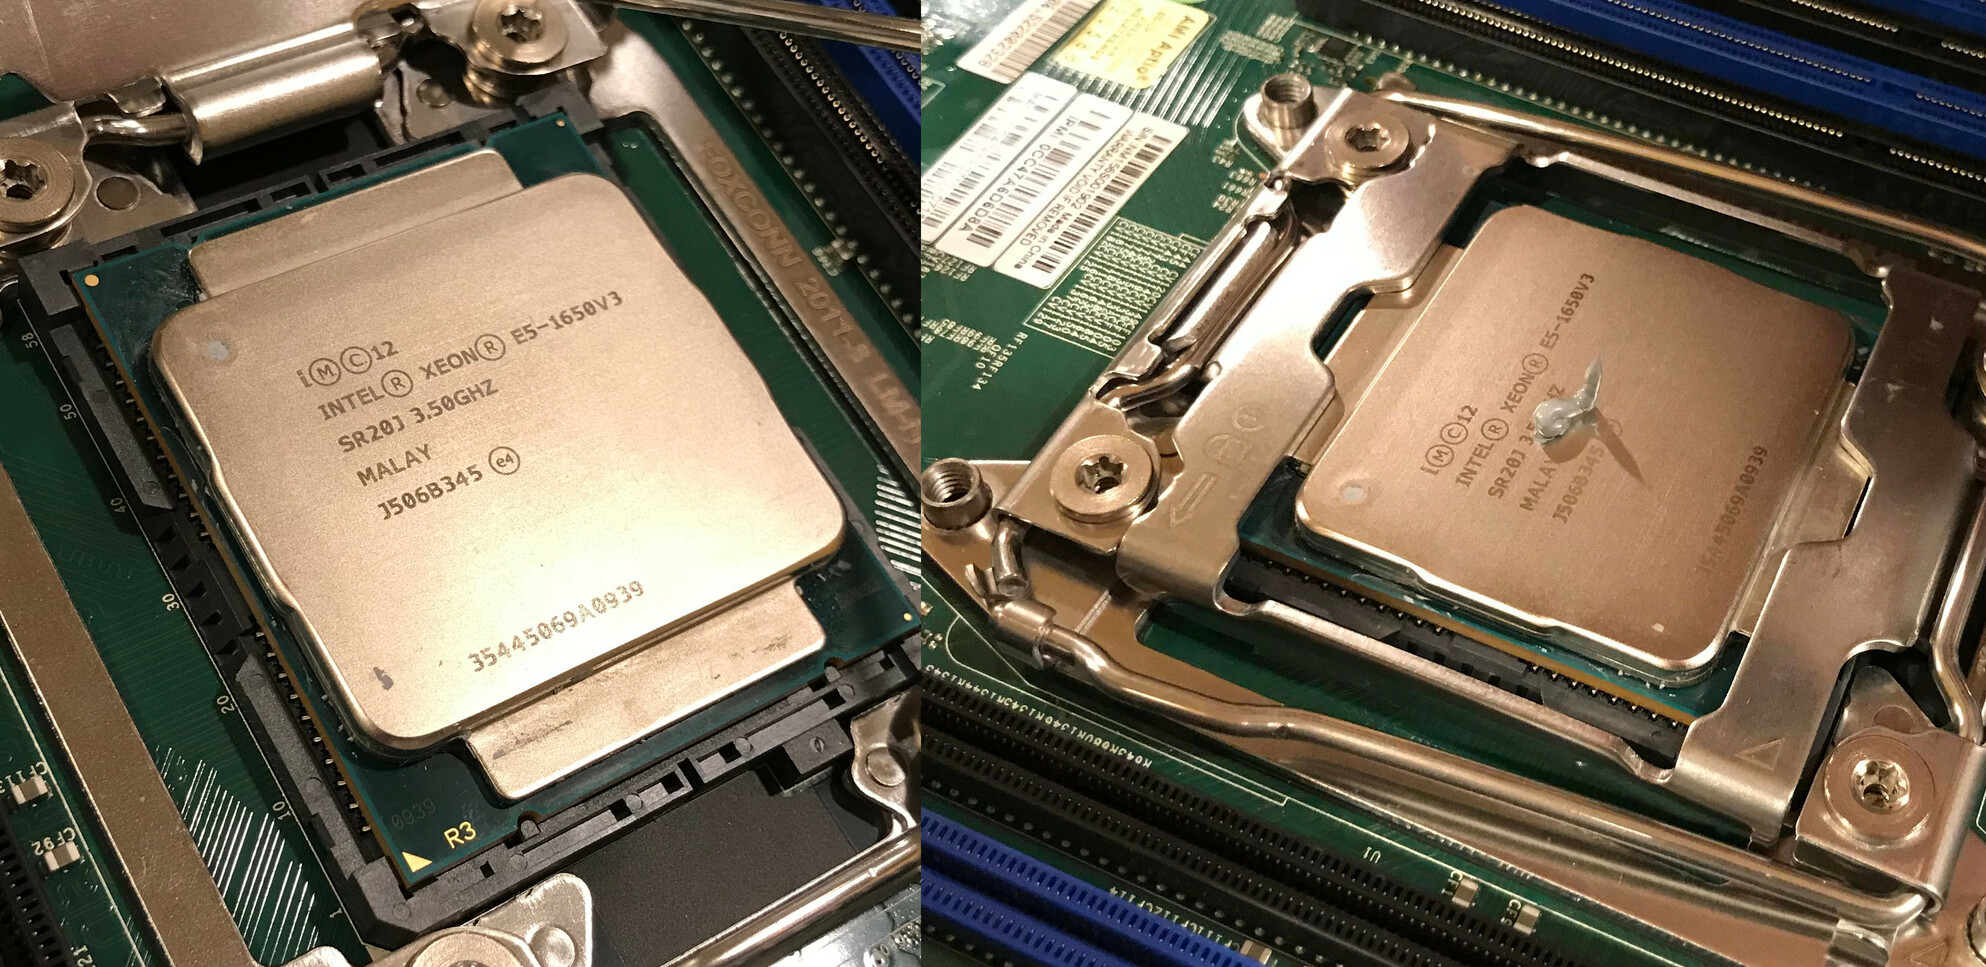 Side by side photo of the CPU in its socket, and the CPU with thermal paste applied.